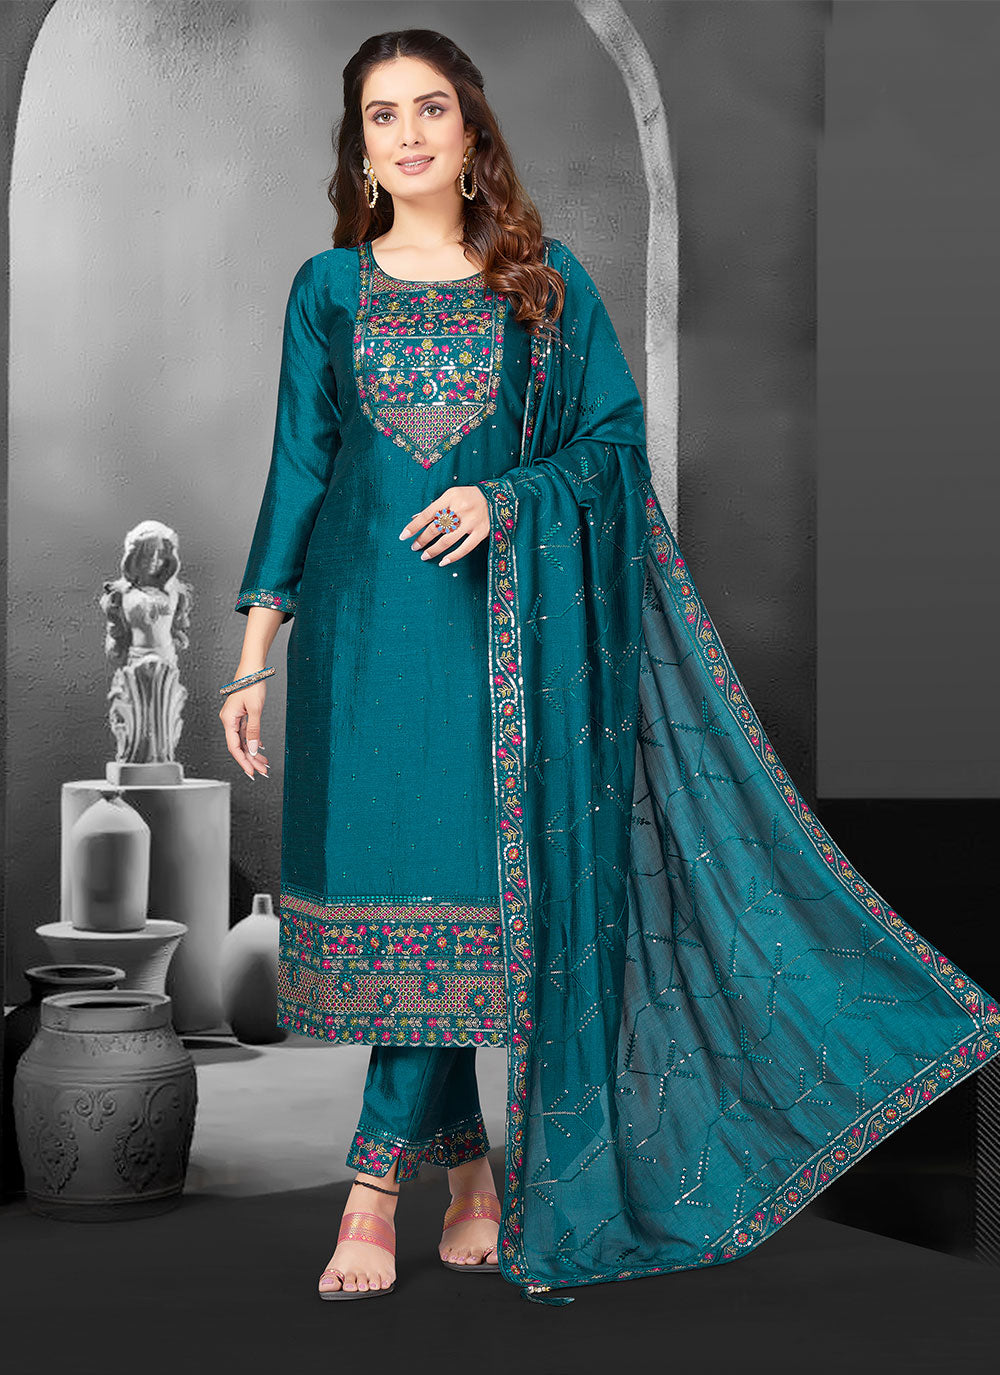 Teal Embroidered And Mirror Work Salwar Suit For Engagement